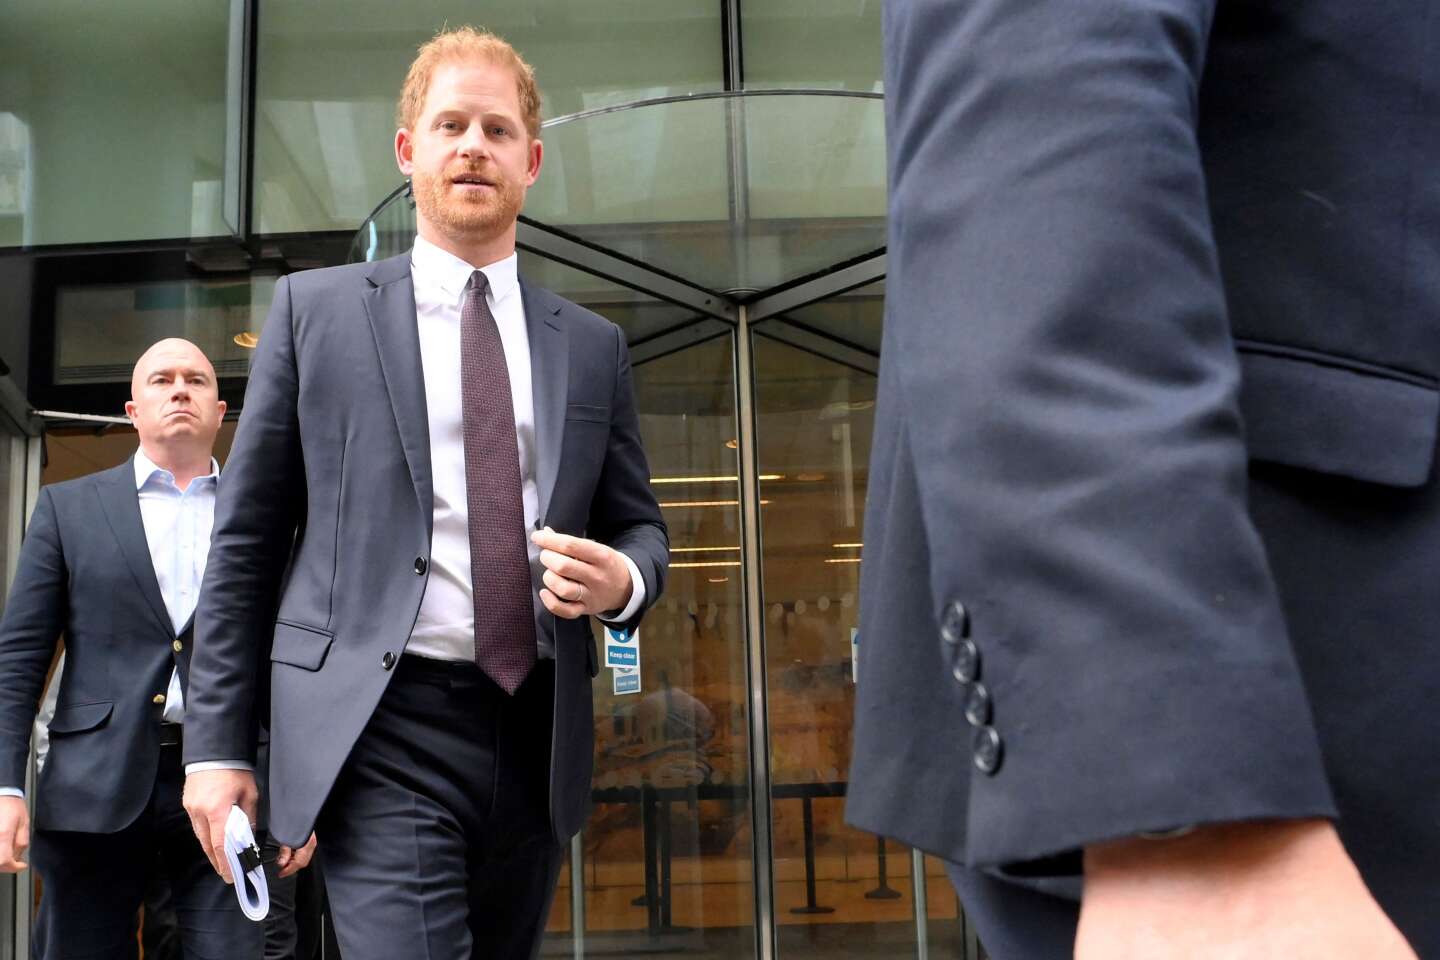 Prince Harry sues tabloids in England’s High Court